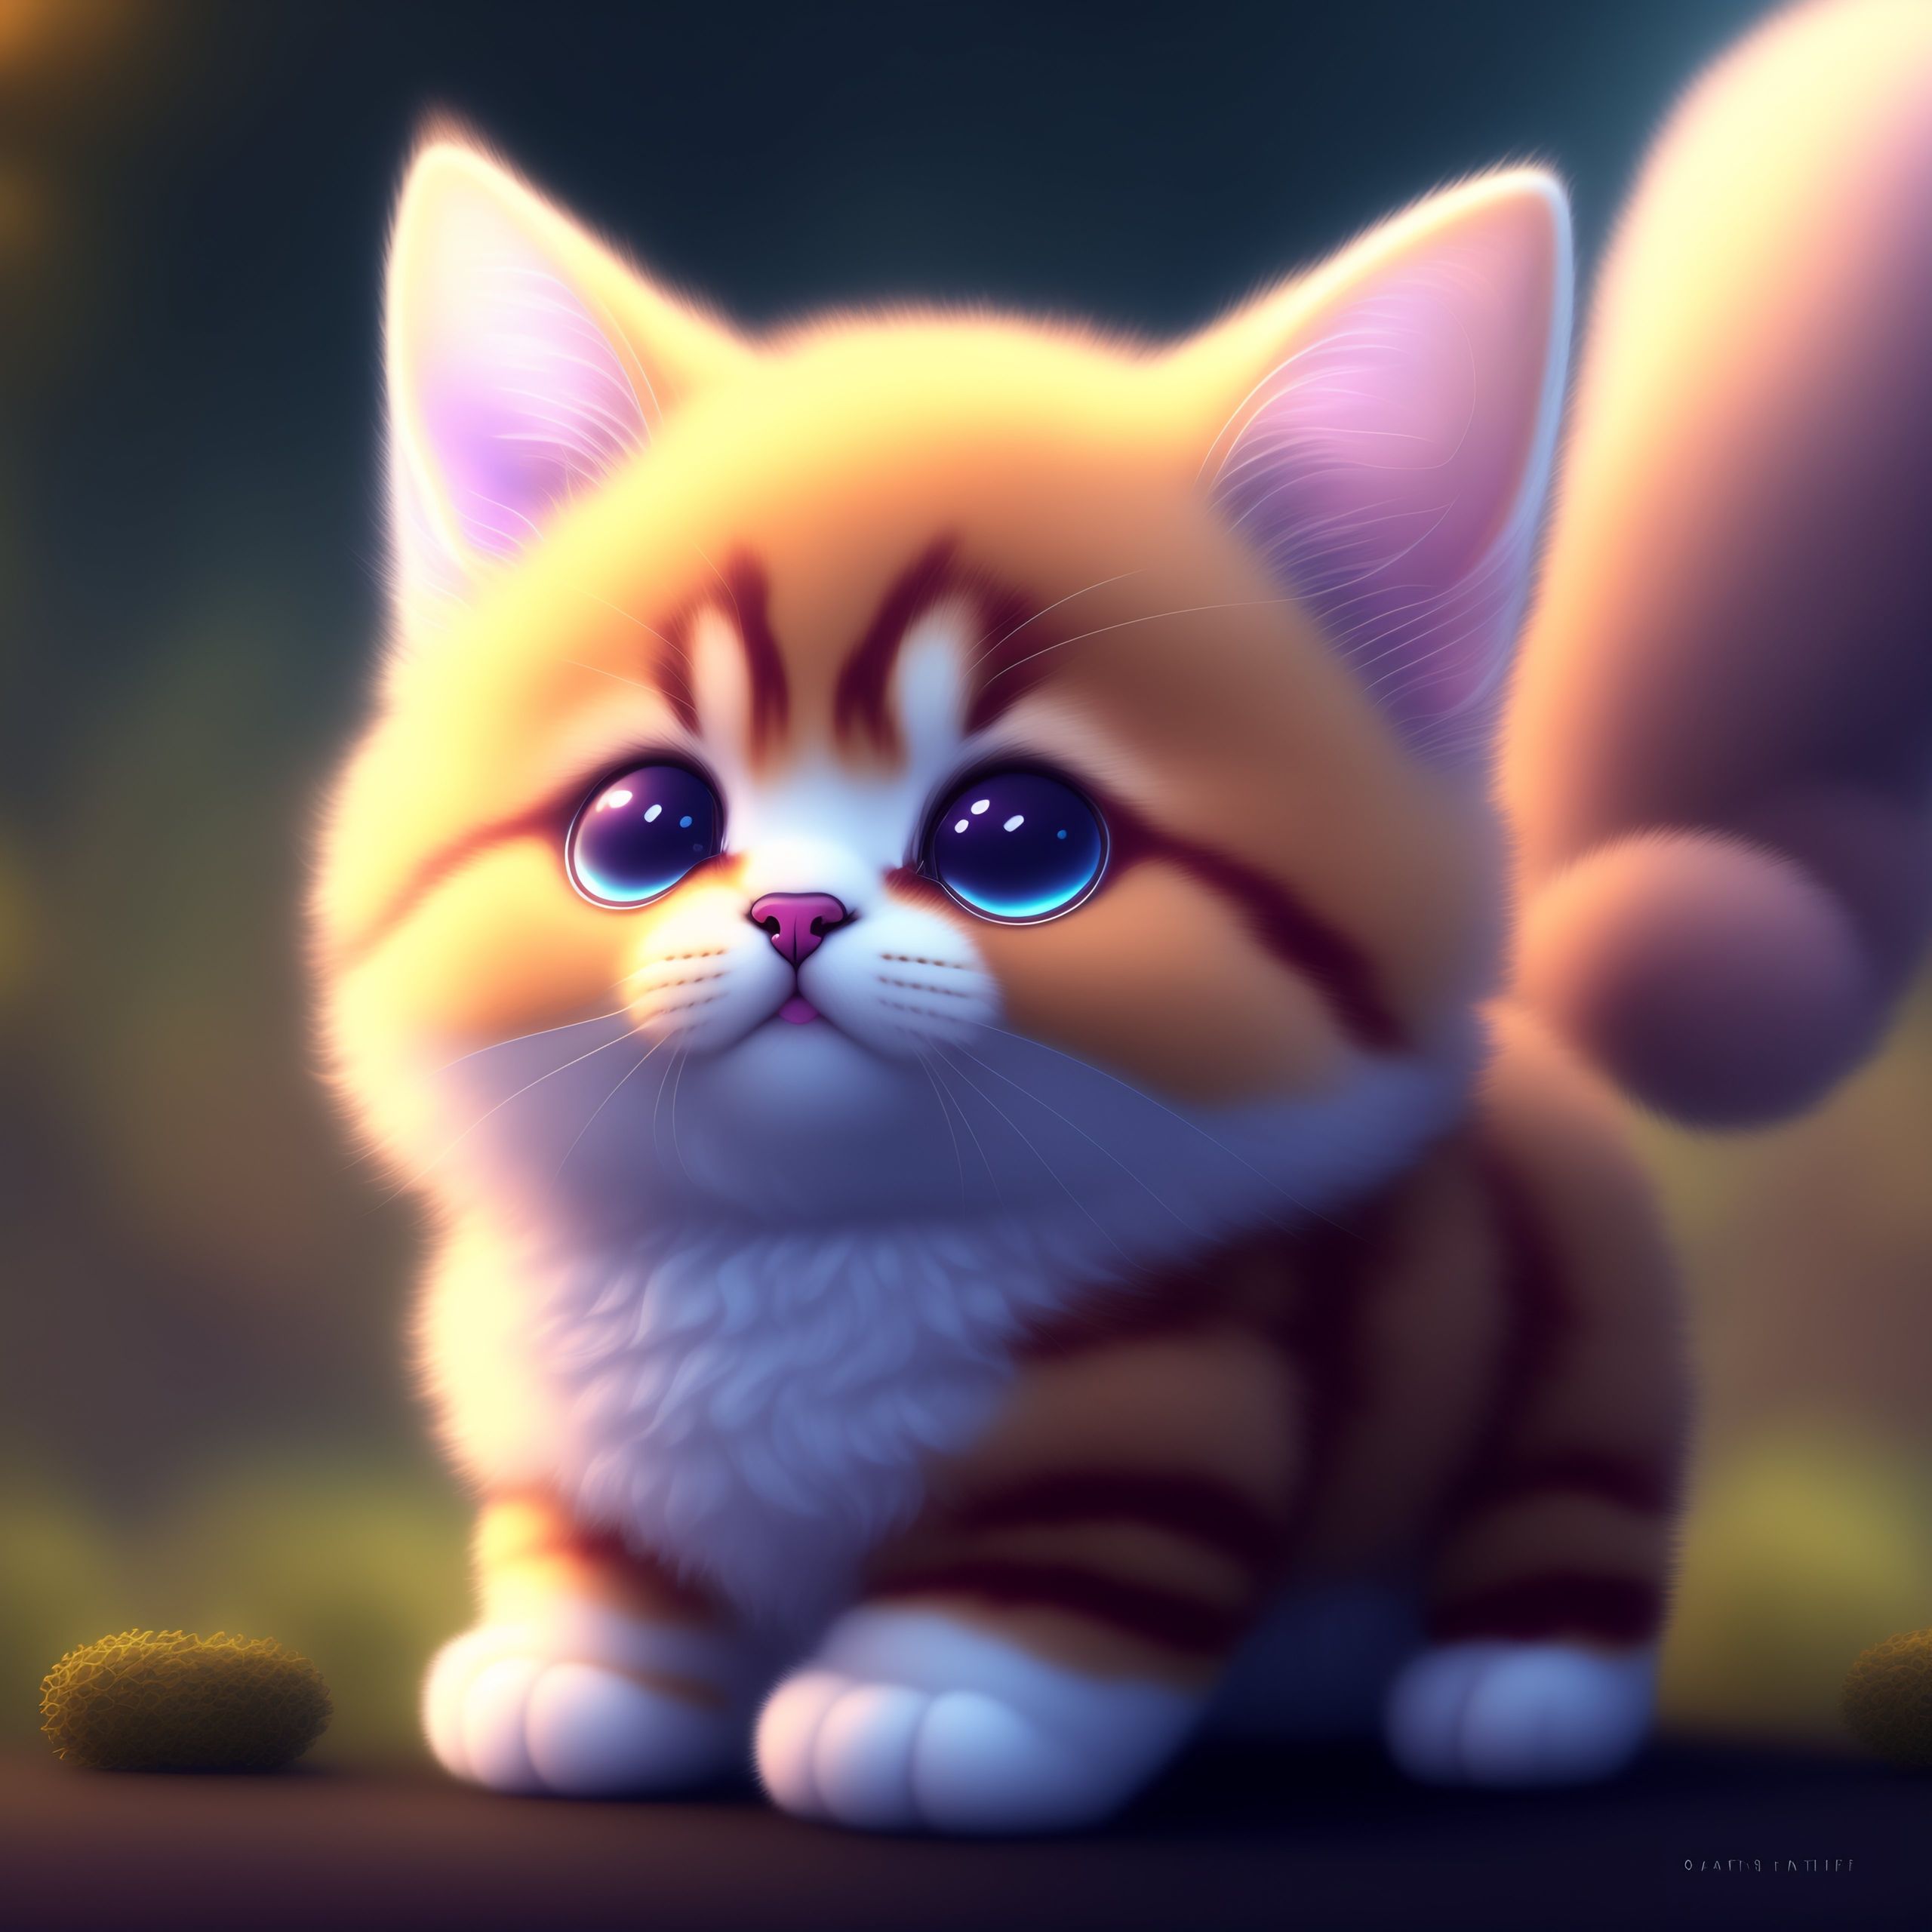 Lexica - Cute and adorable fluffy baby cat, fantasy, dreamlike